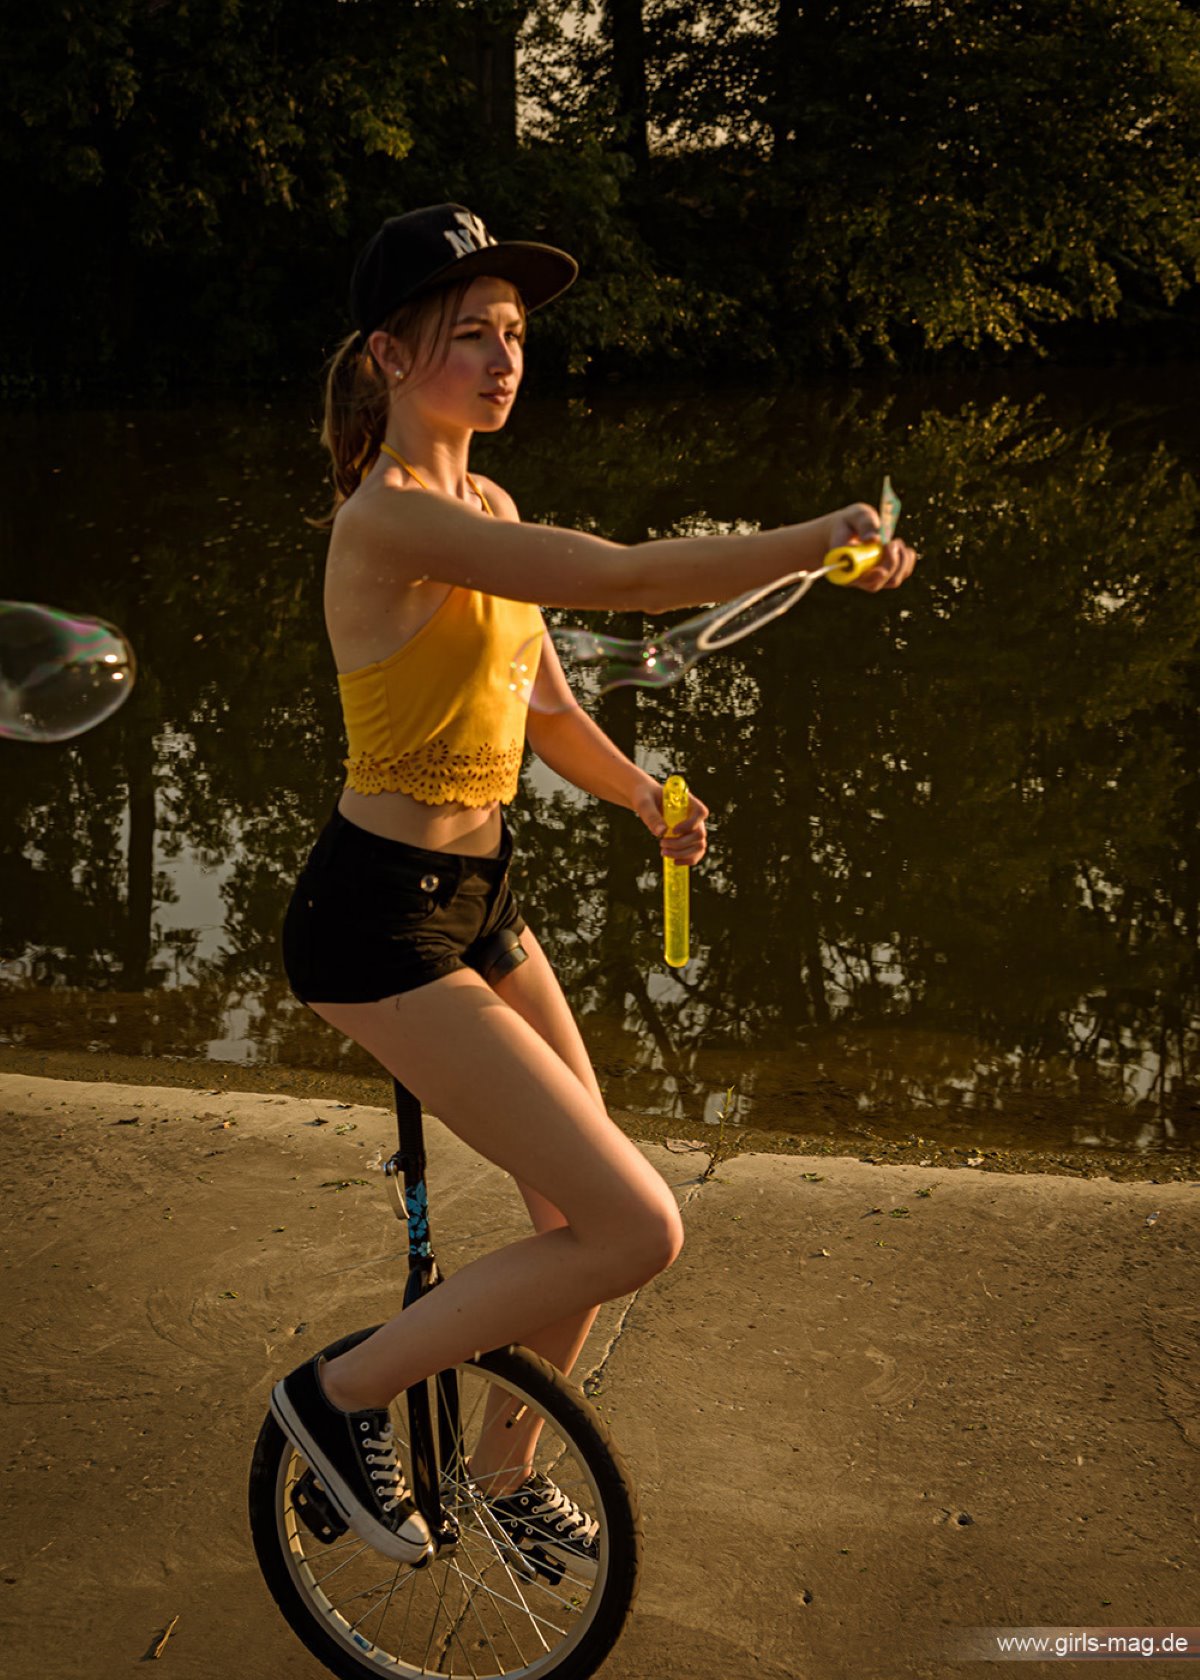 Girls Mag Annika Bubbles on a Unicycle 0092 5998625704.jpg